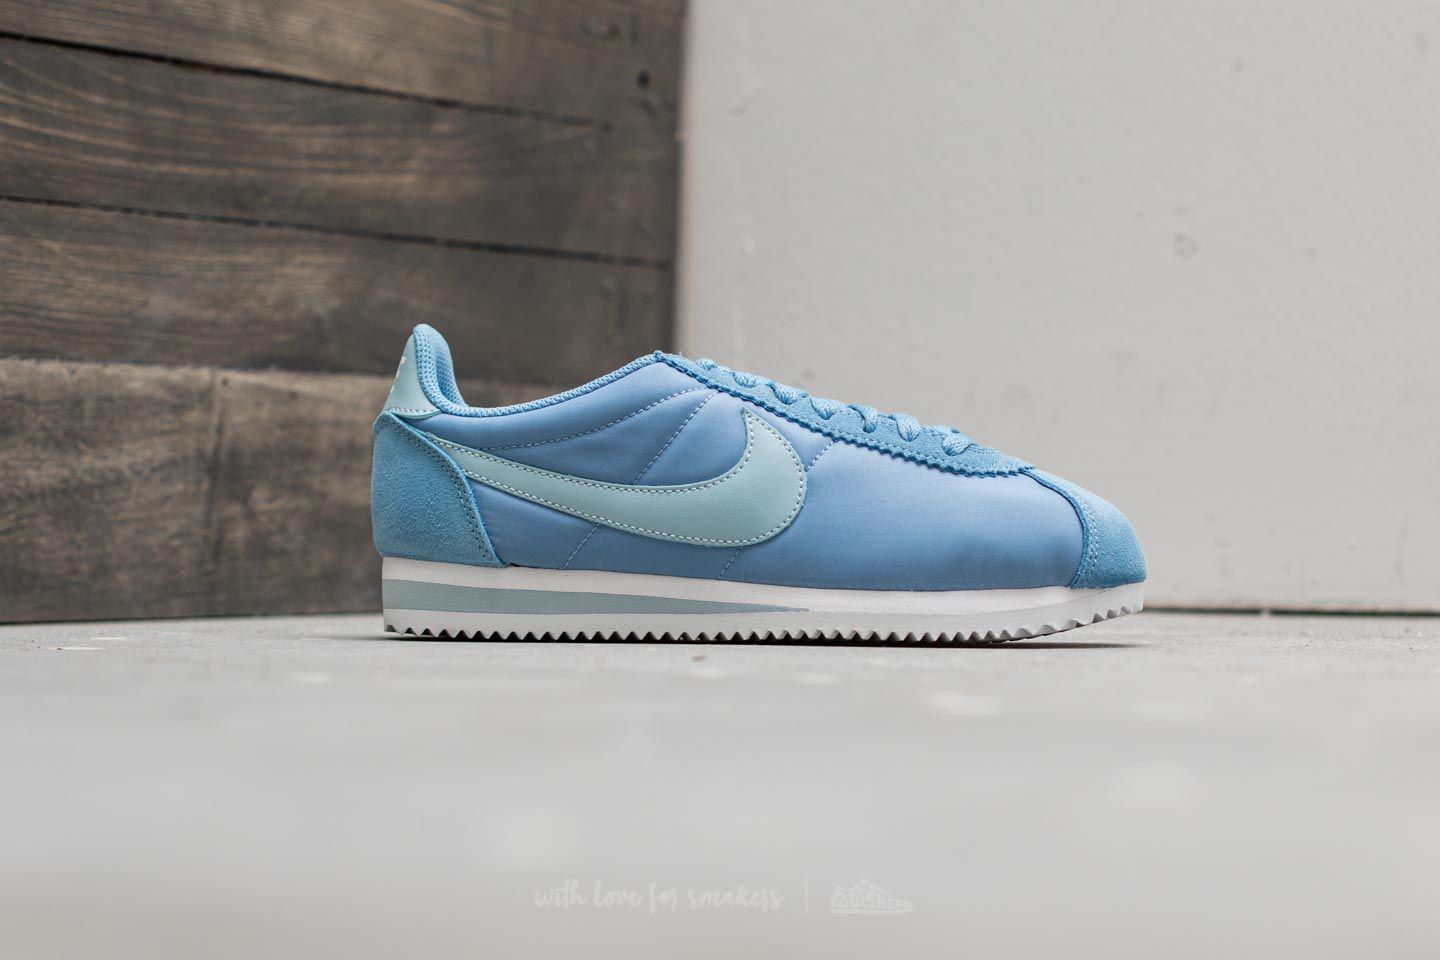 lade angreb whisky Nike Wmns Classic Cortez Nylon December Sky/ Light Armory Blue | Lyst